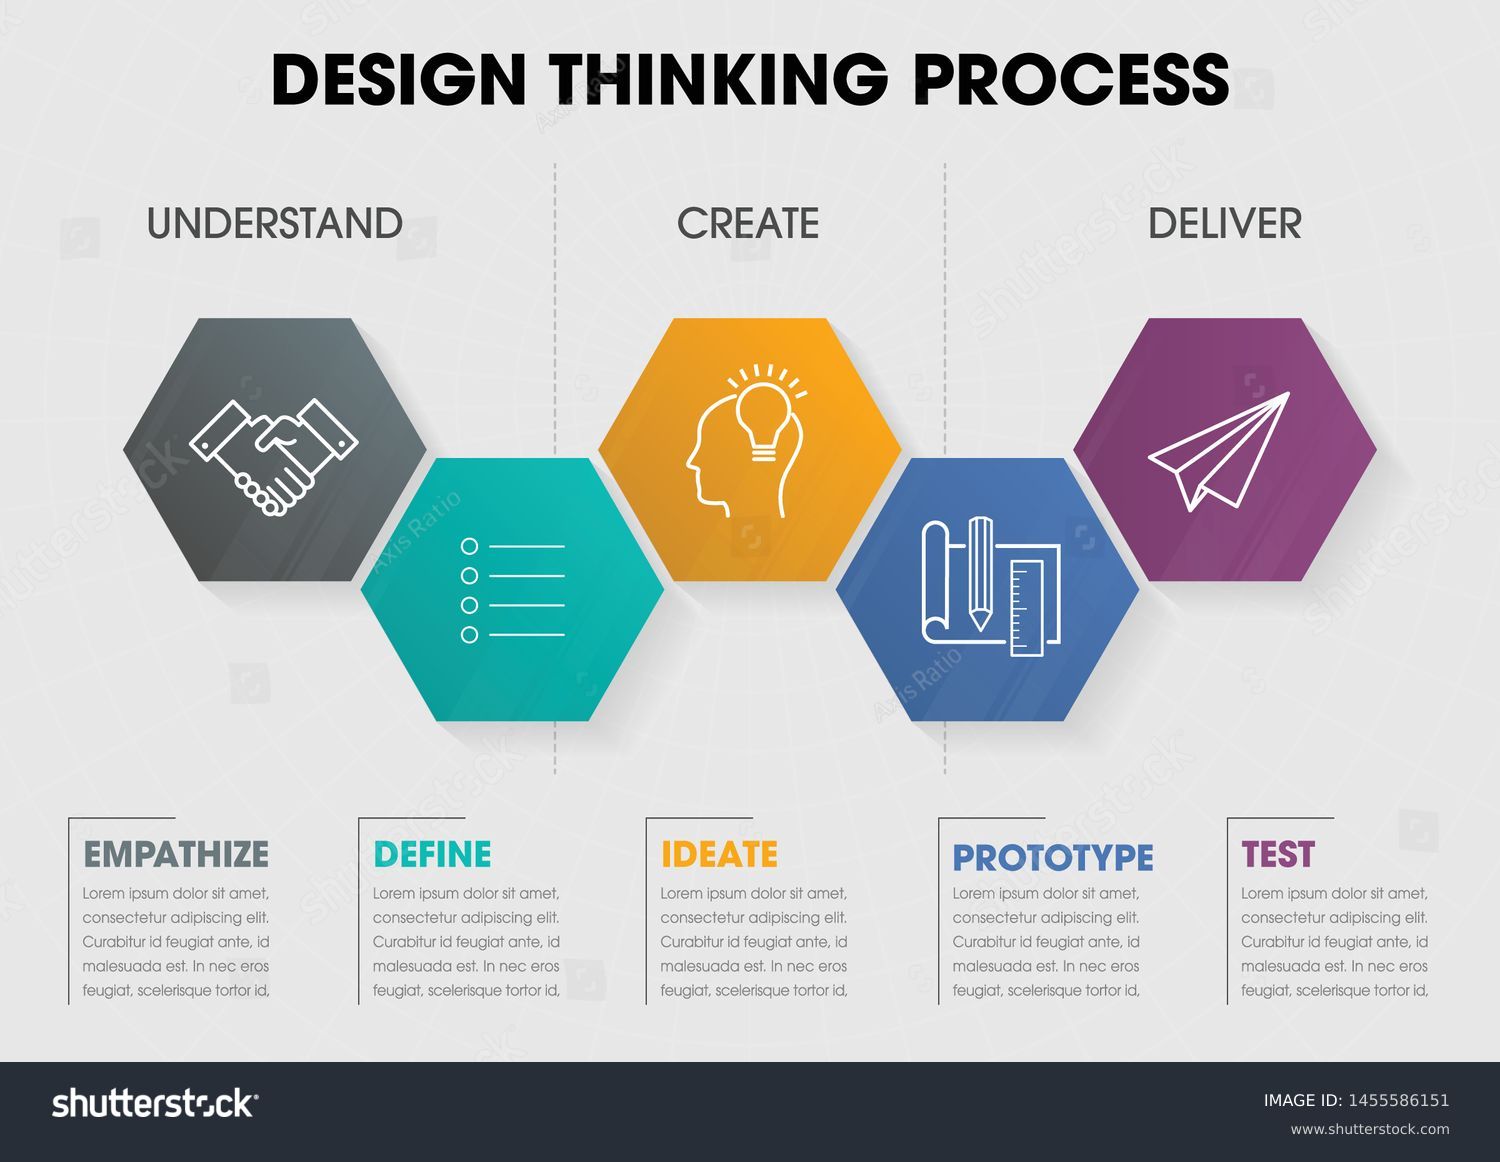 Info Graphic Design Thinking Process Empathise Royalty Free Stock Vector 1455586151 1610